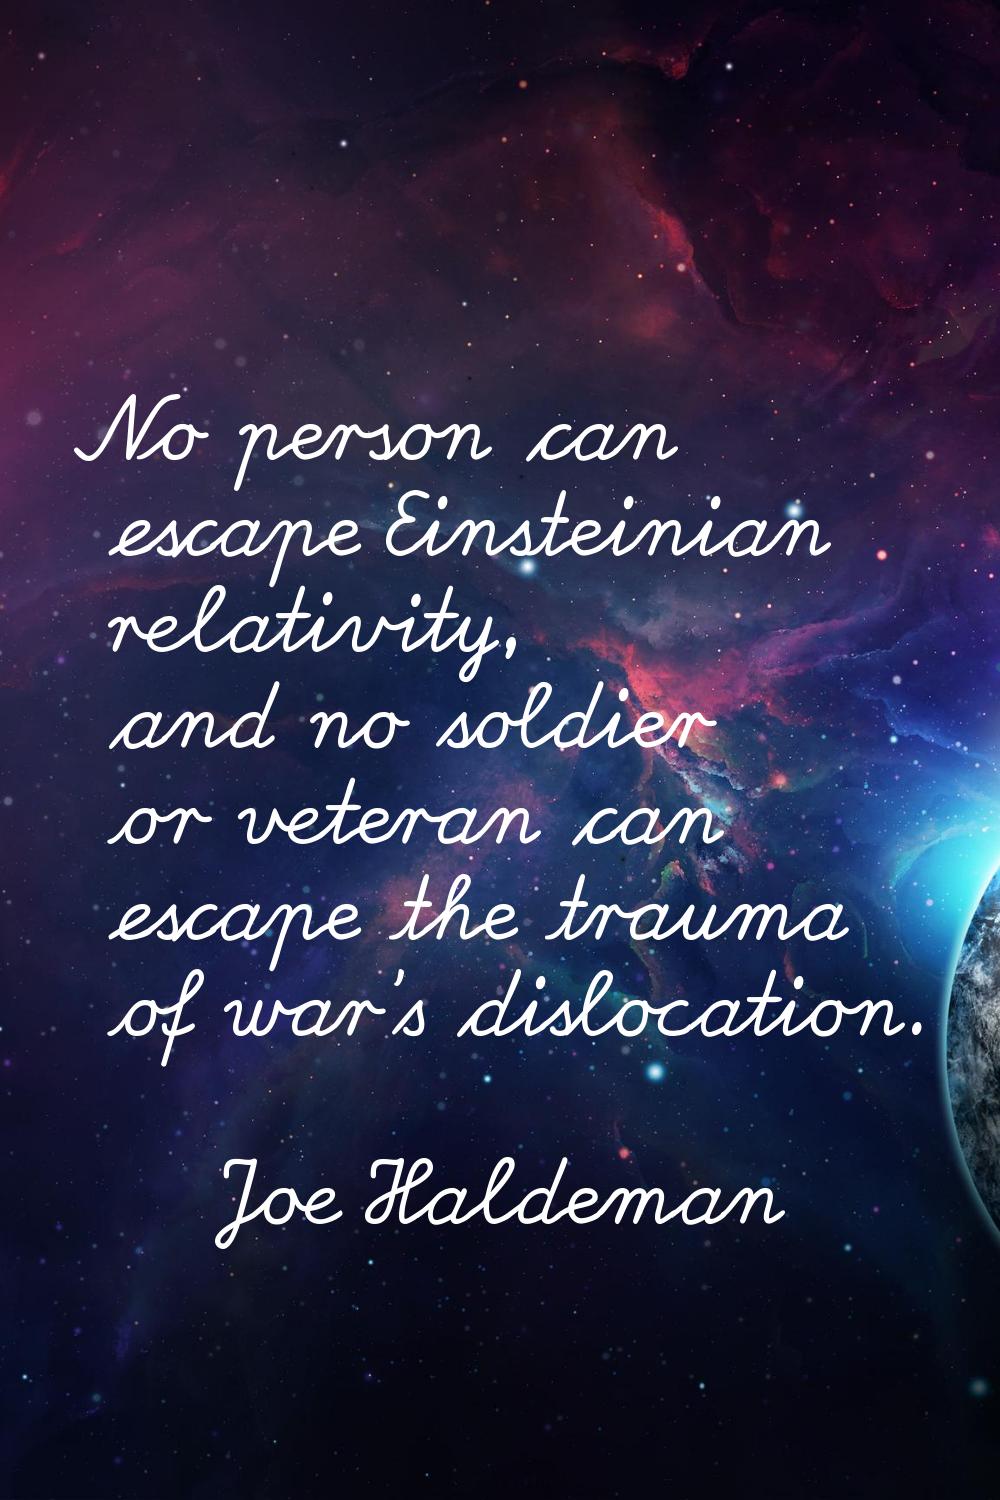 No person can escape Einsteinian relativity, and no soldier or veteran can escape the trauma of war